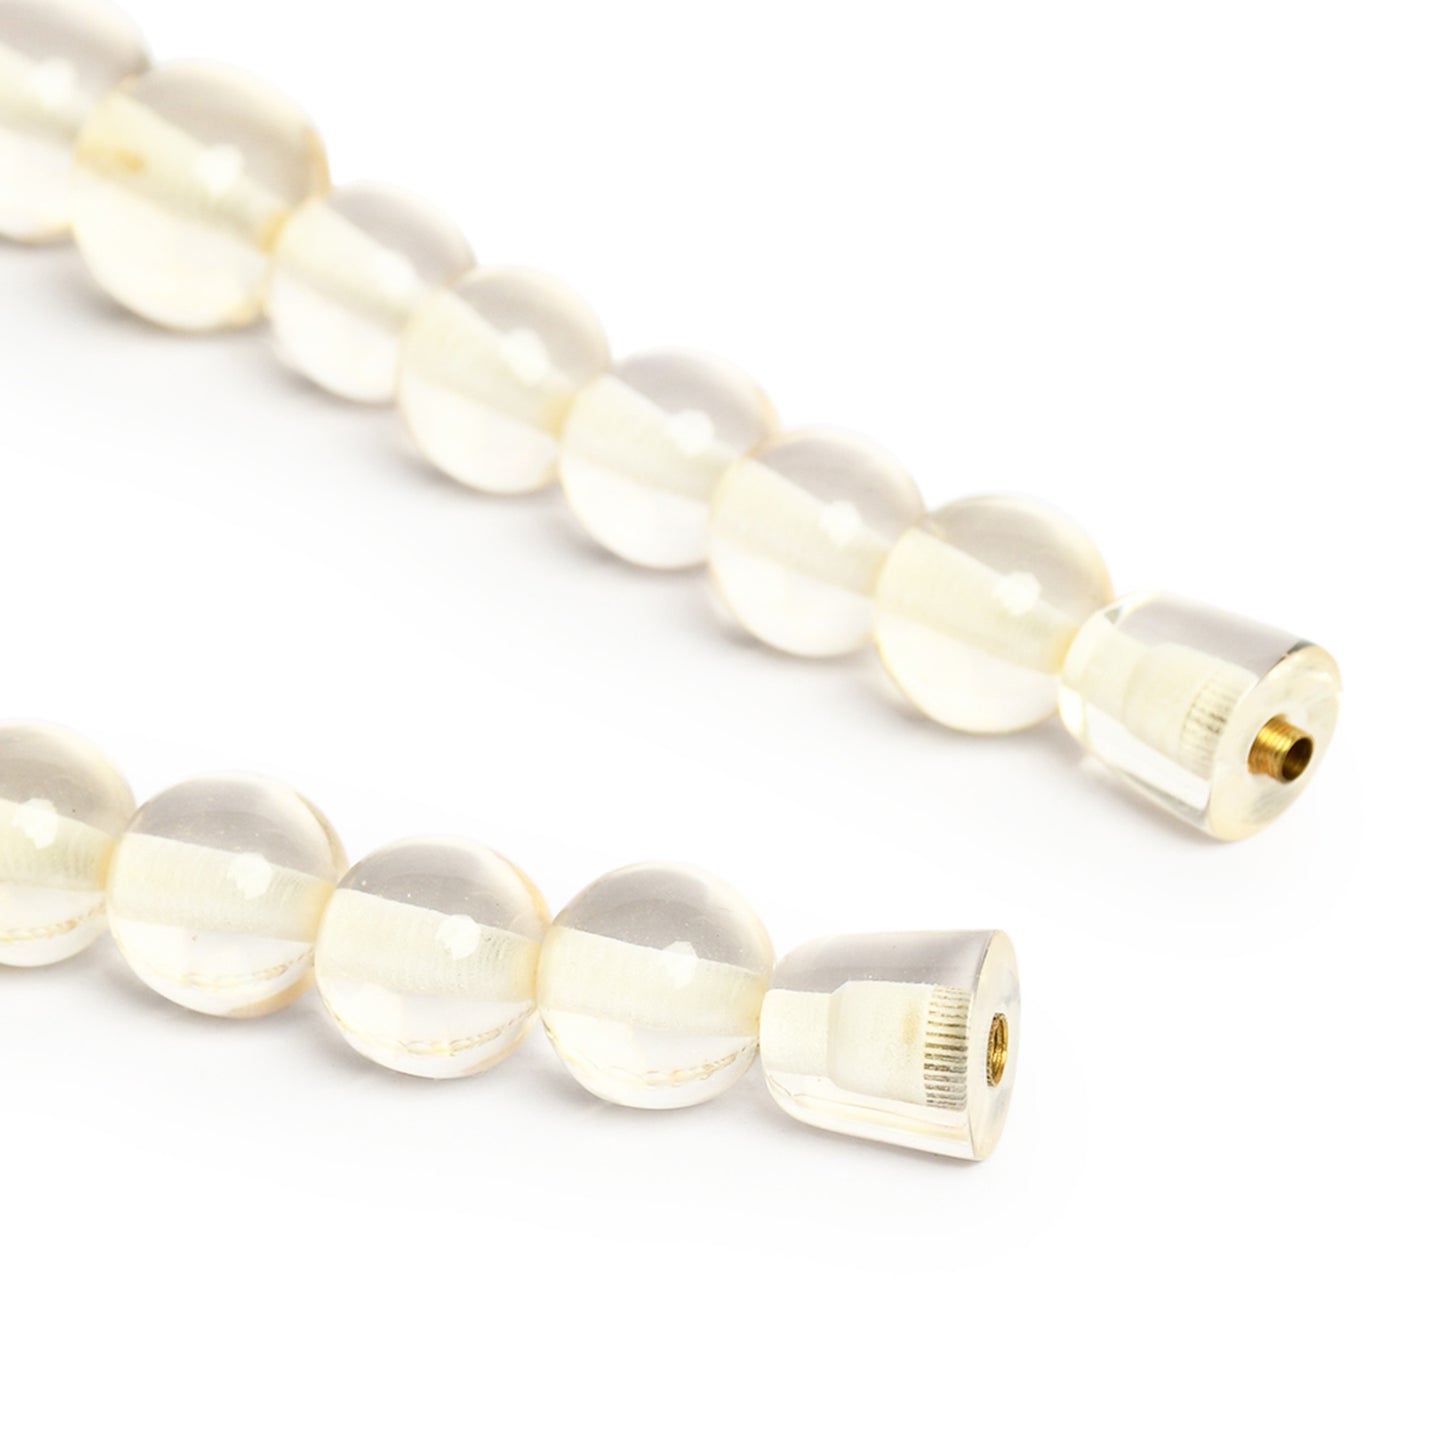 Resin White Transparent Beaded Handcrafted Necklace by Bamboo Tree Jewels